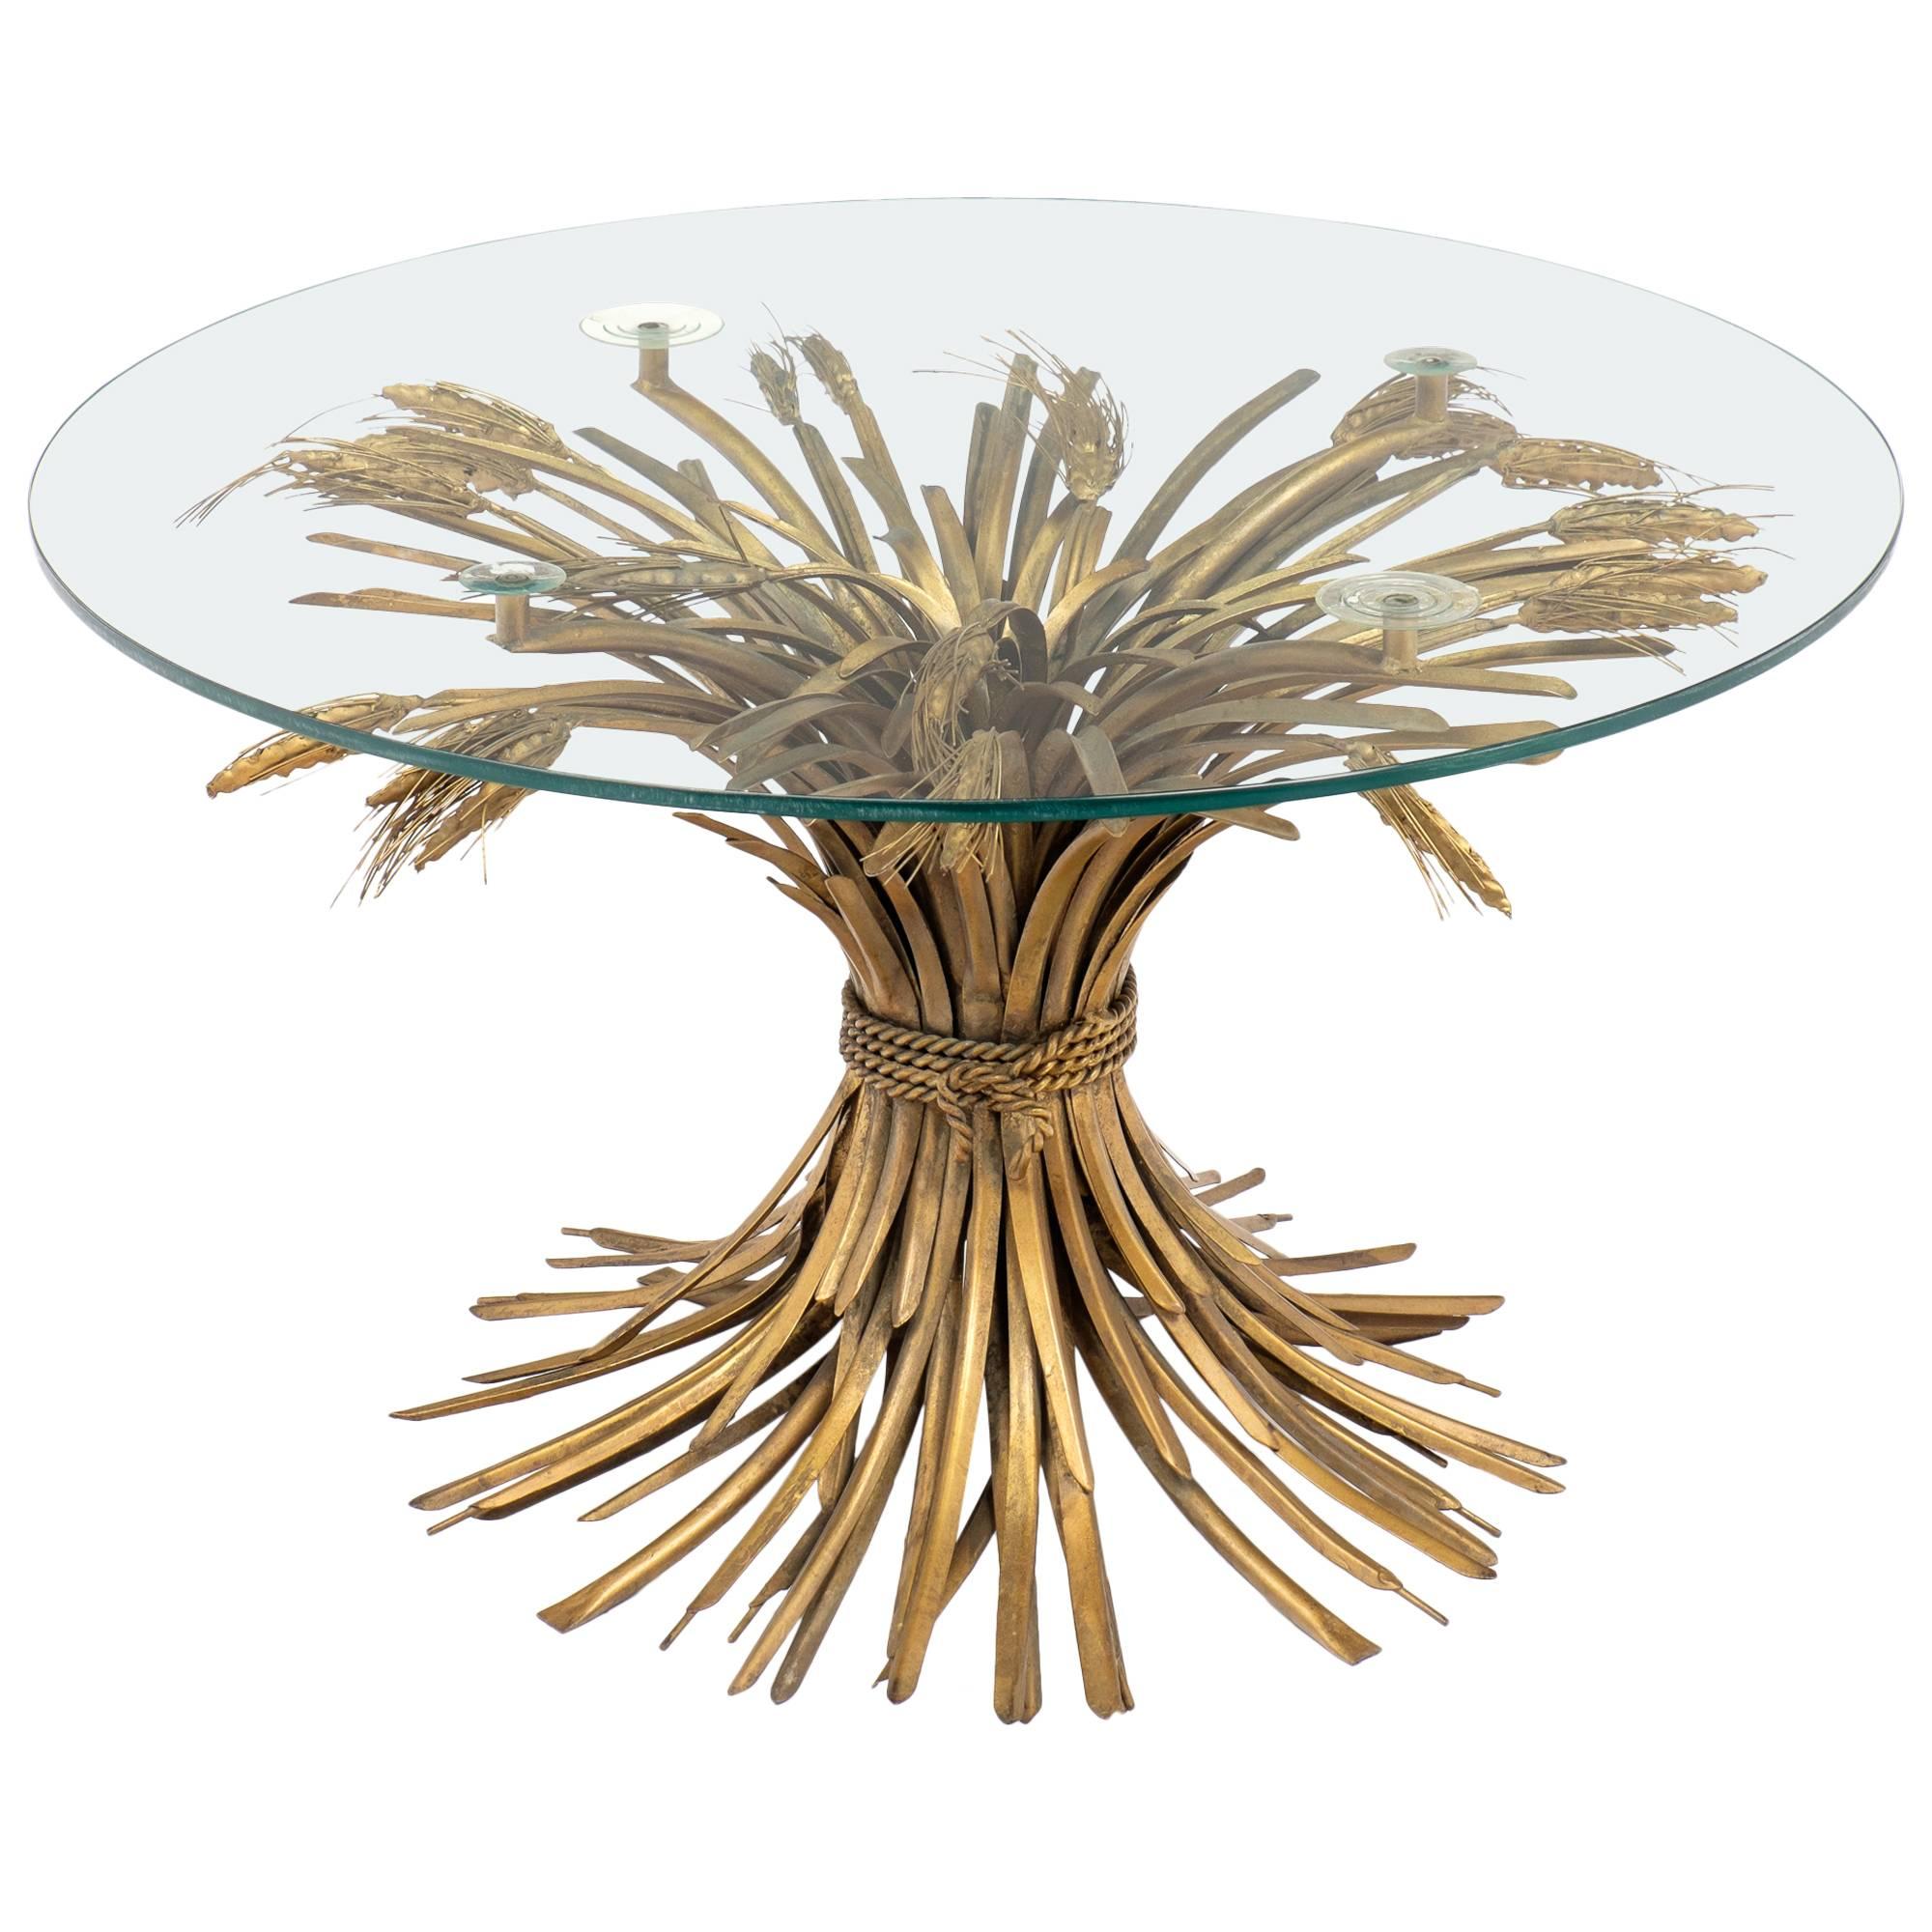 Vintage Sheaf of Wheat Occasional Table